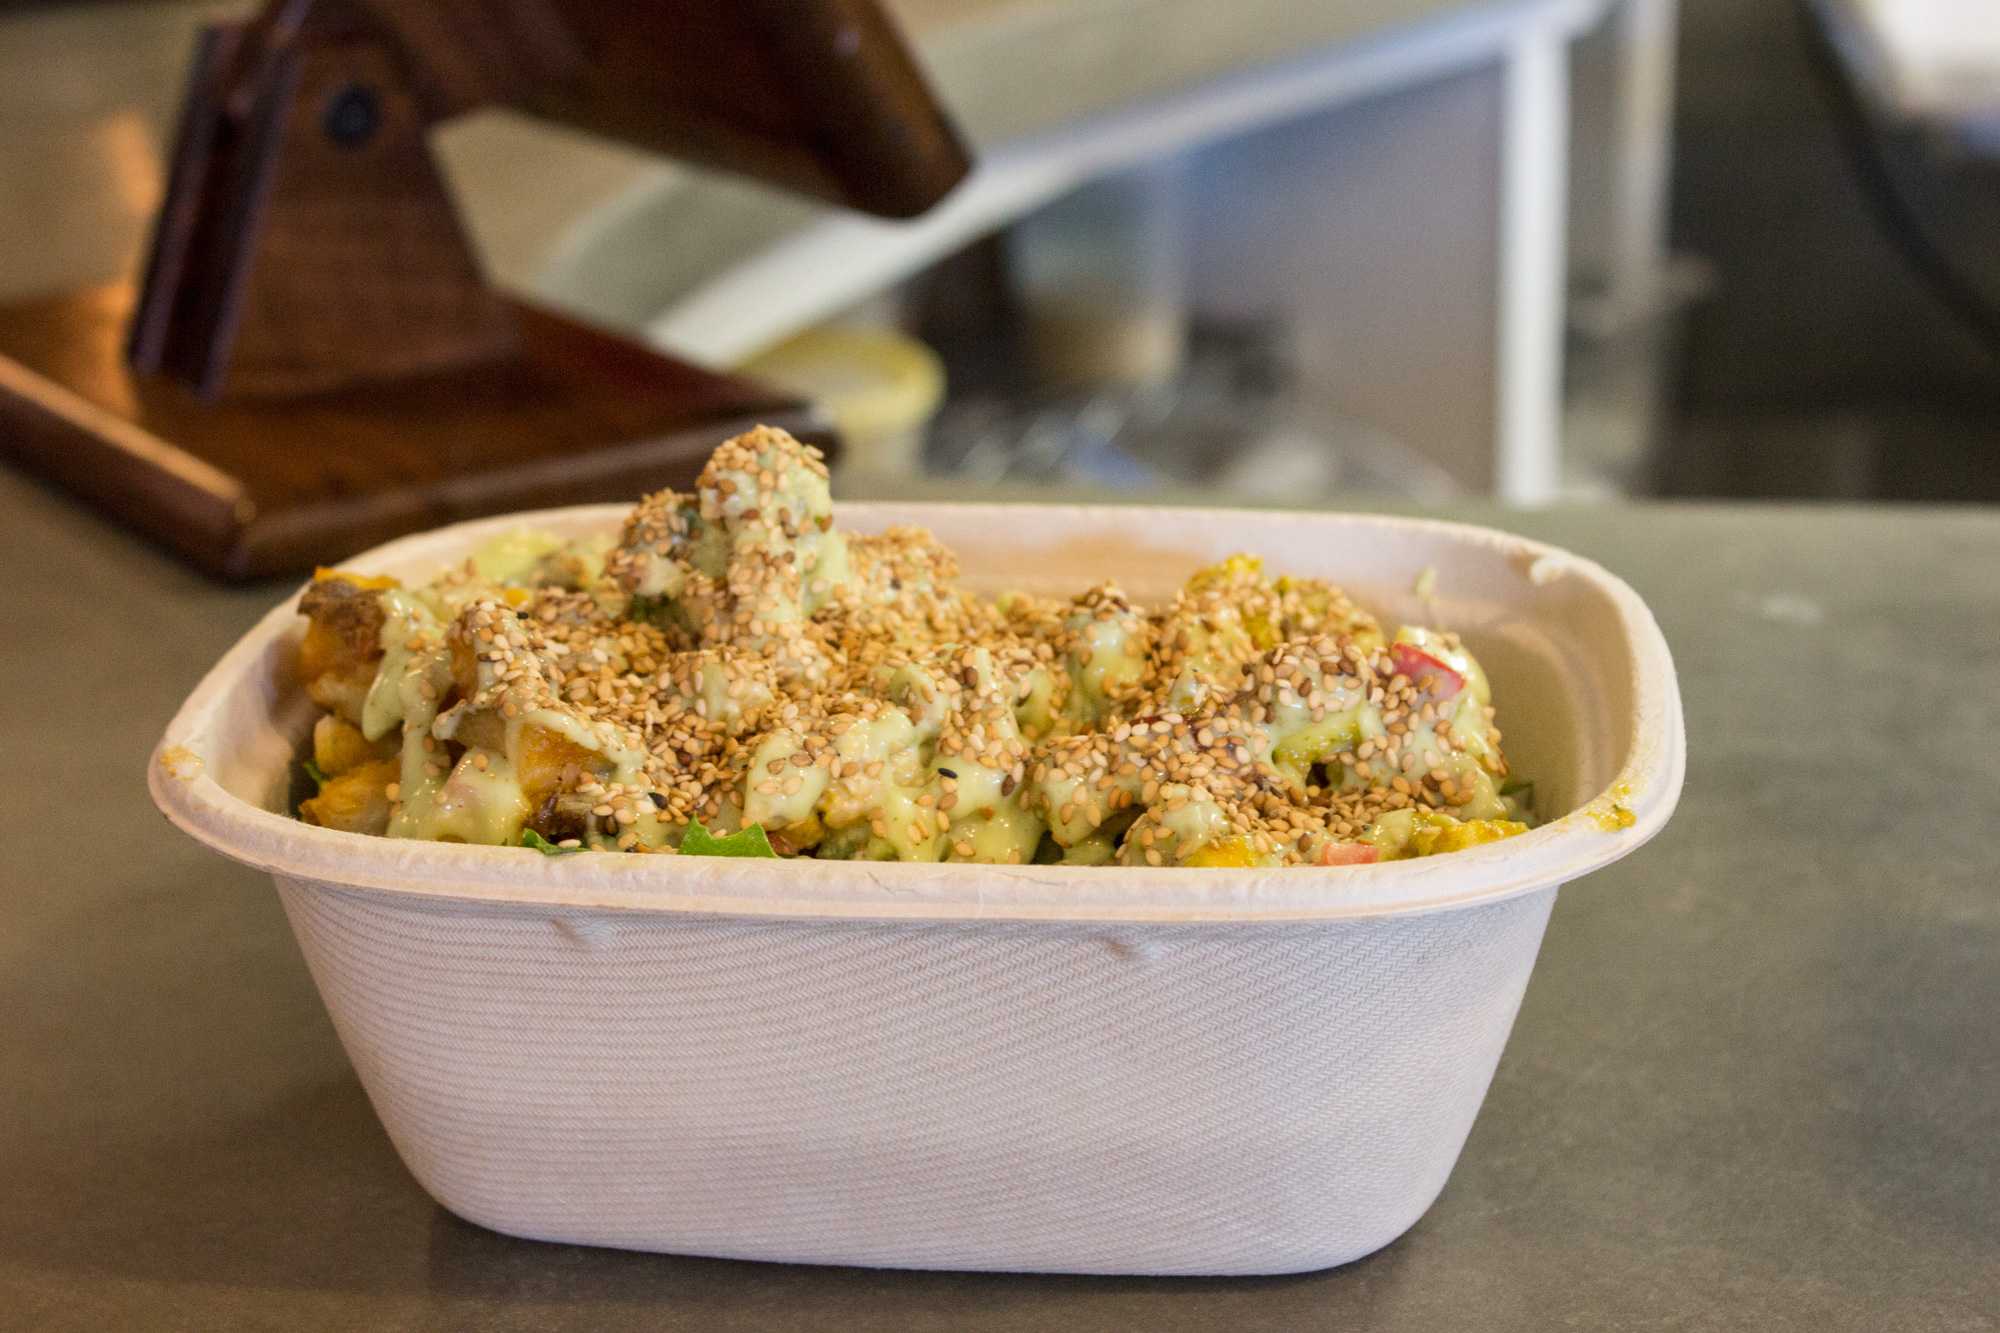 An example of one of Kindly Kitchens 100% vegan and 100% gluten free bowls. The unique restaurant is located on King Street on the conner of Depot Street. They sell a variety of bowls, salads, and smoothies.